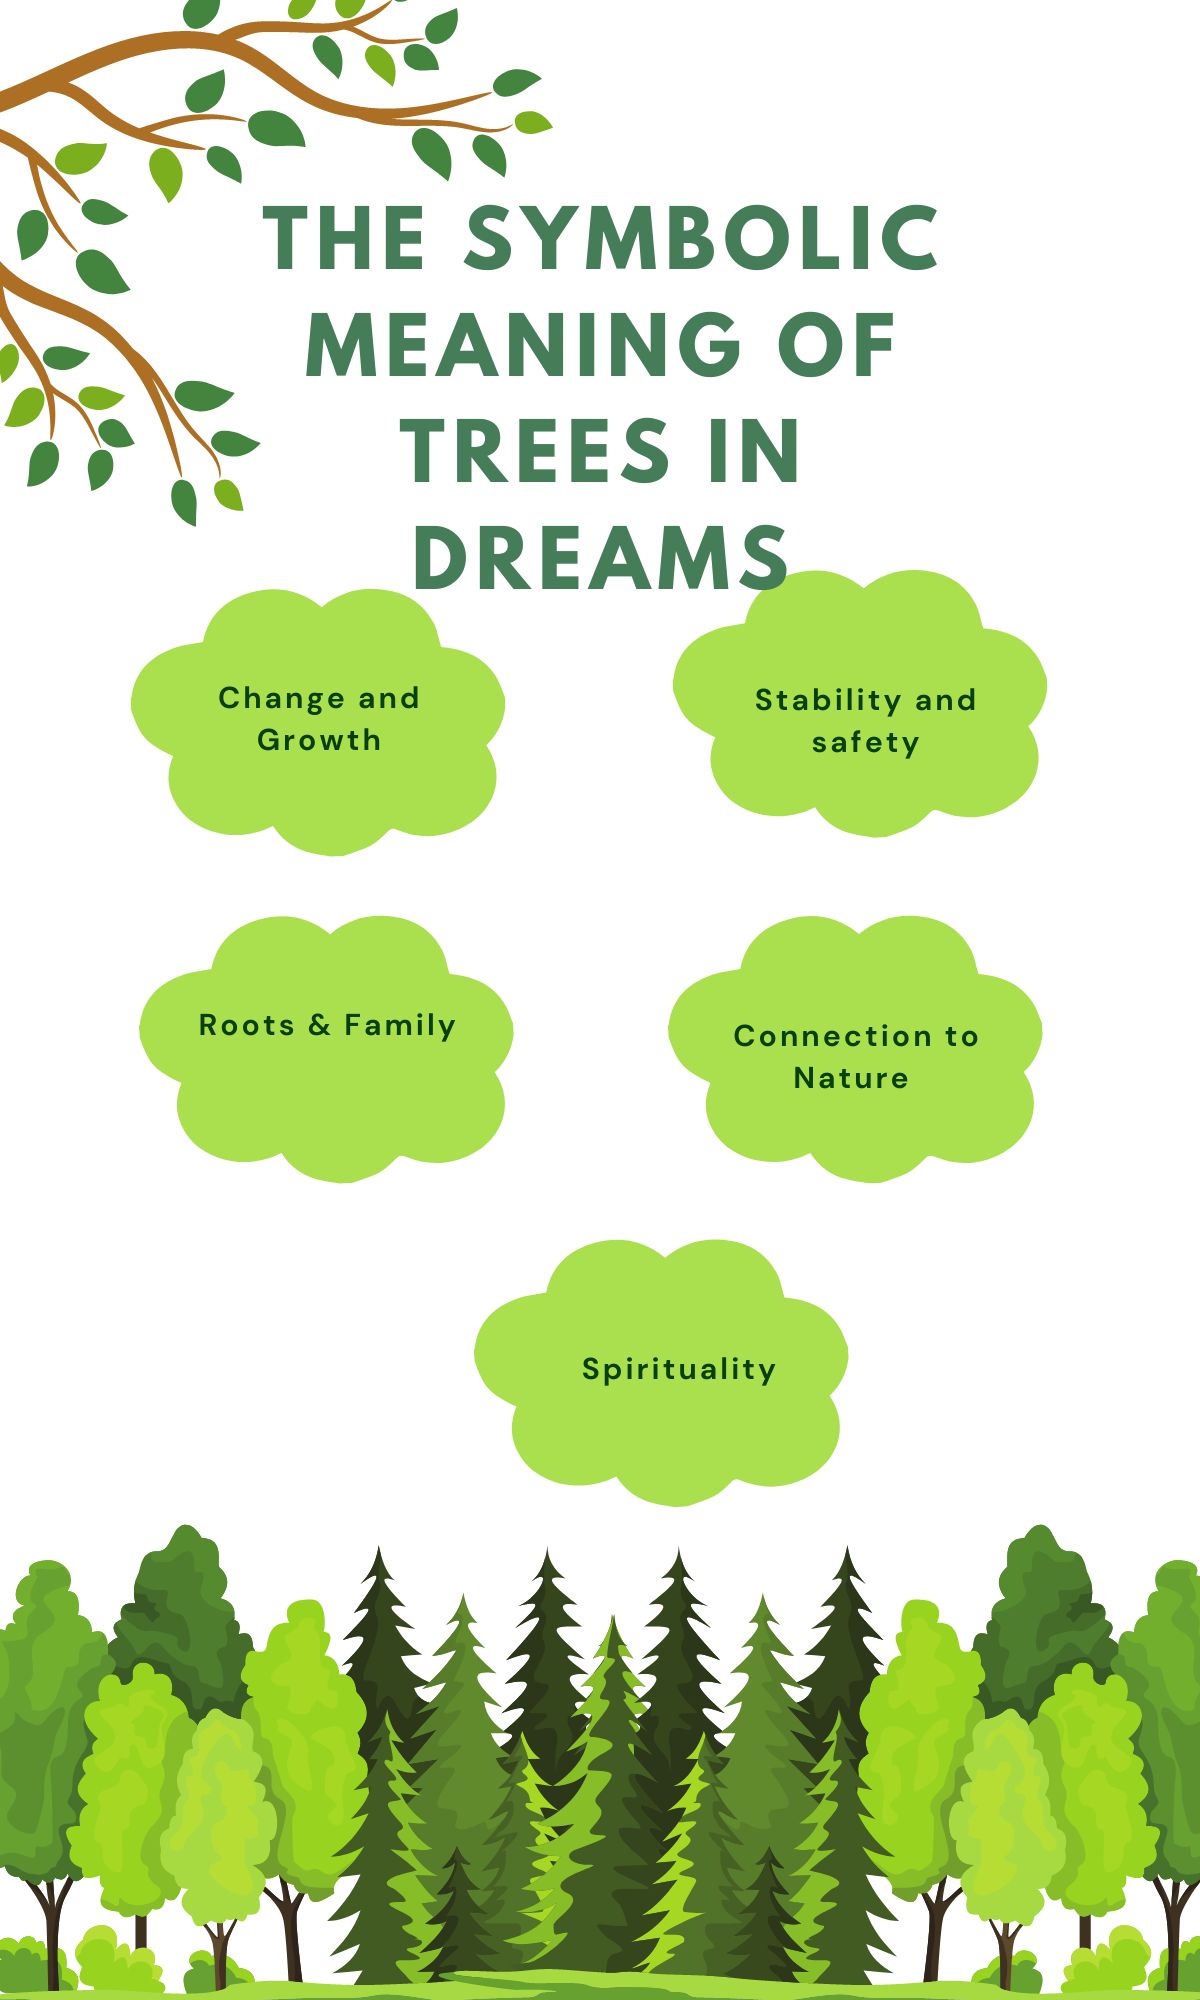 The Symbolic Meaning of Trees in Dreams